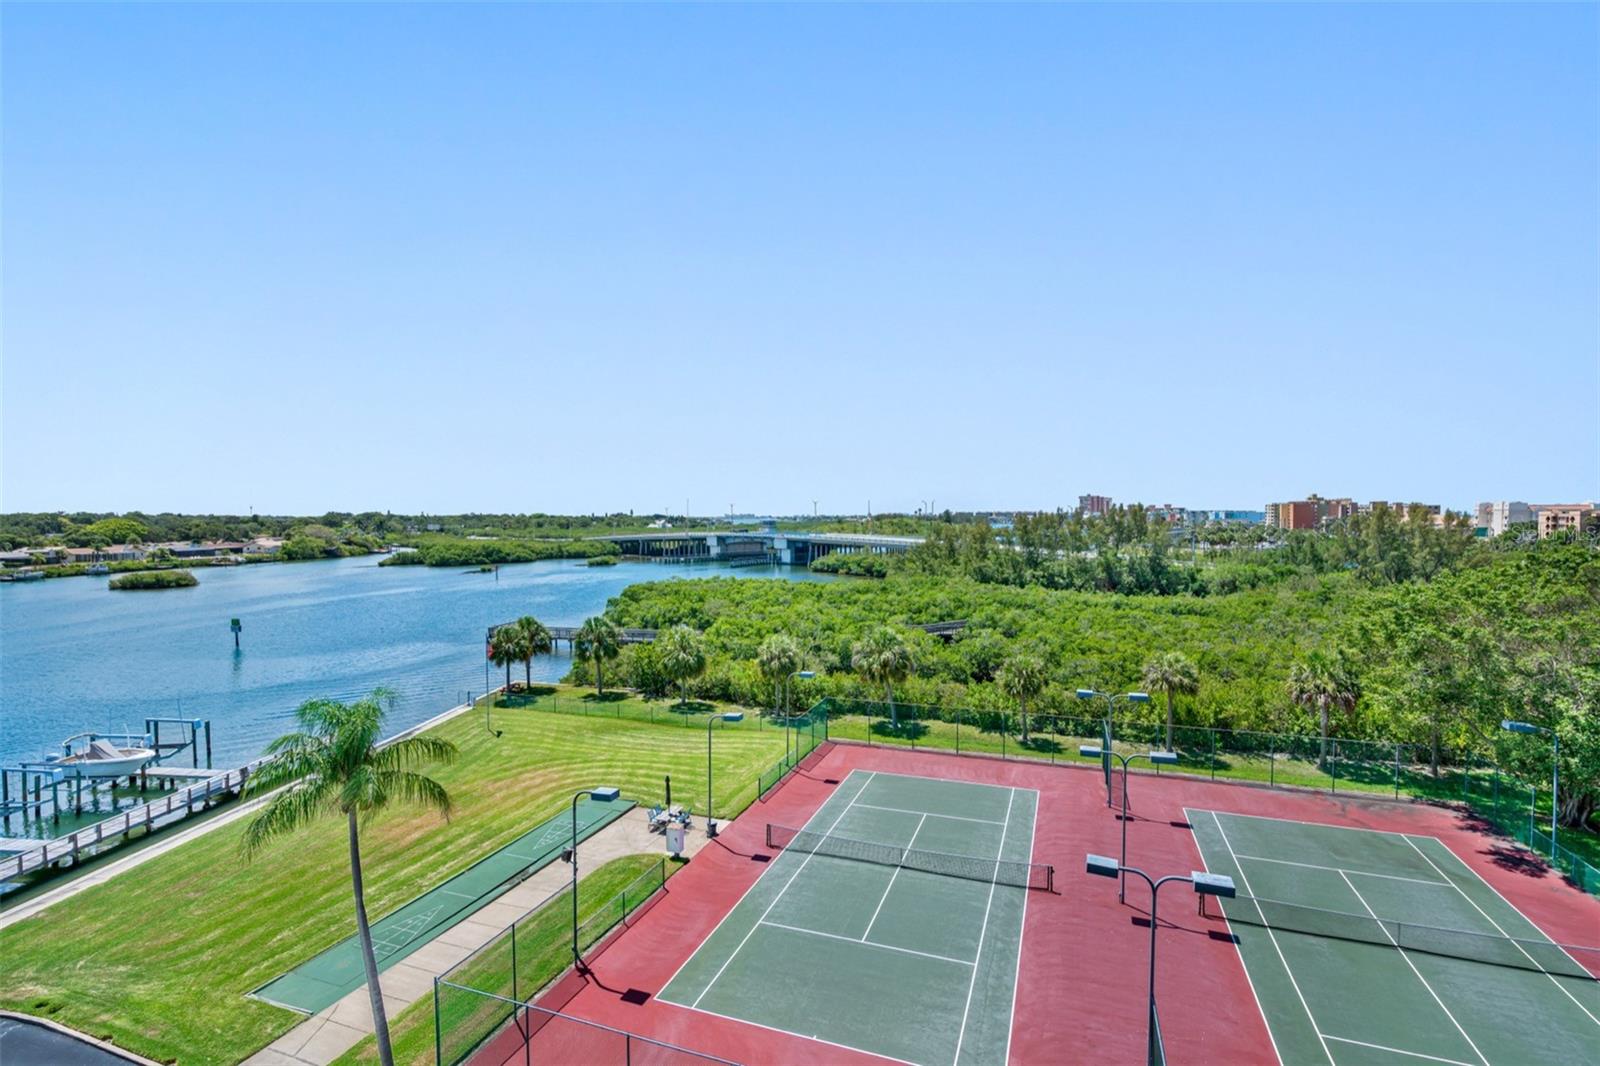 ... South West Exposure is sought after from Winter Guests. Unit # 512 has just that.. And not a bad seat to Pickle Ball if you are so inclined. NOTE: Shuffle Board Court next to Tennis Crt.